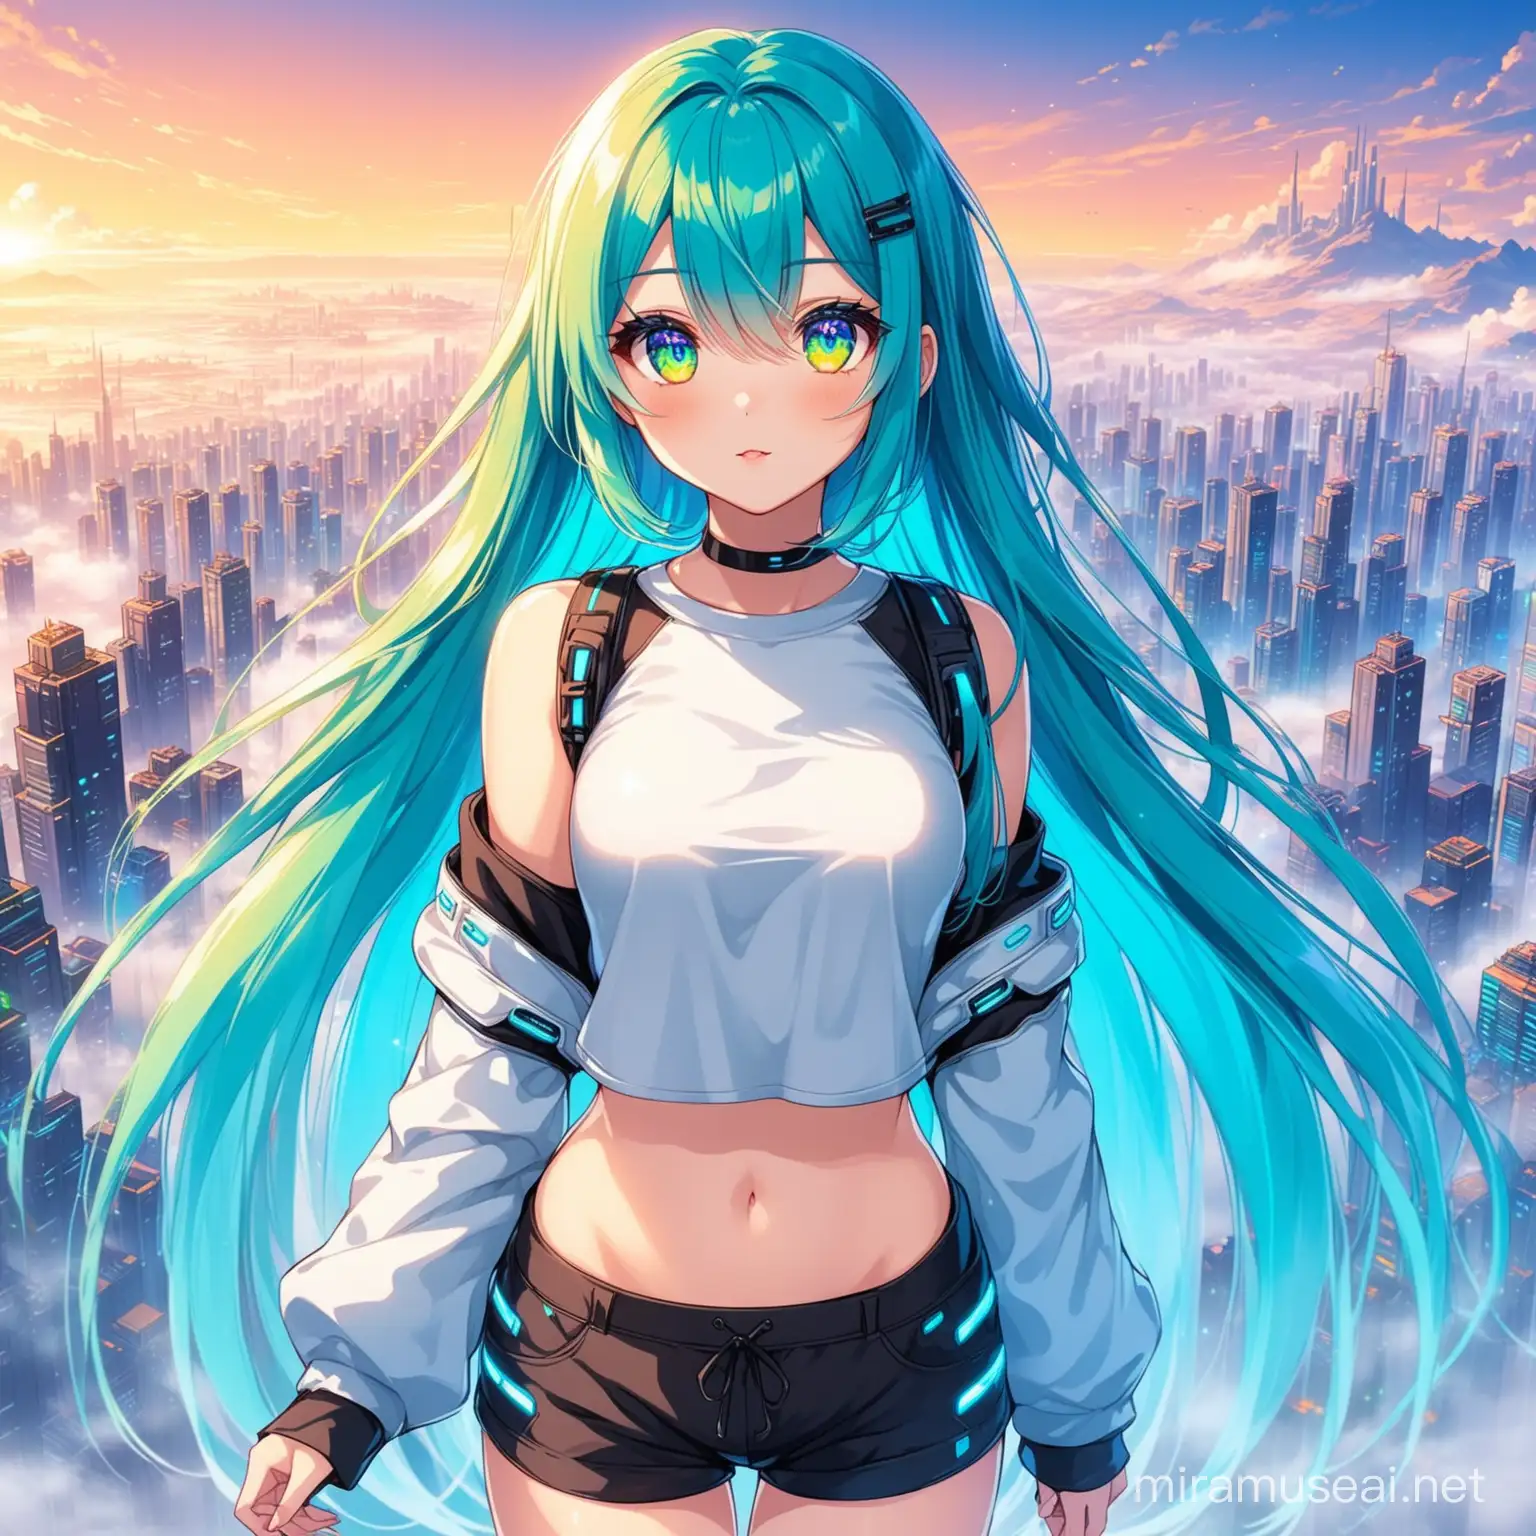 cute girl, anime, shorts, collorfull hairs, long hairs, vtuber, a short top, fog futuristic city in the background, collorful eyes,